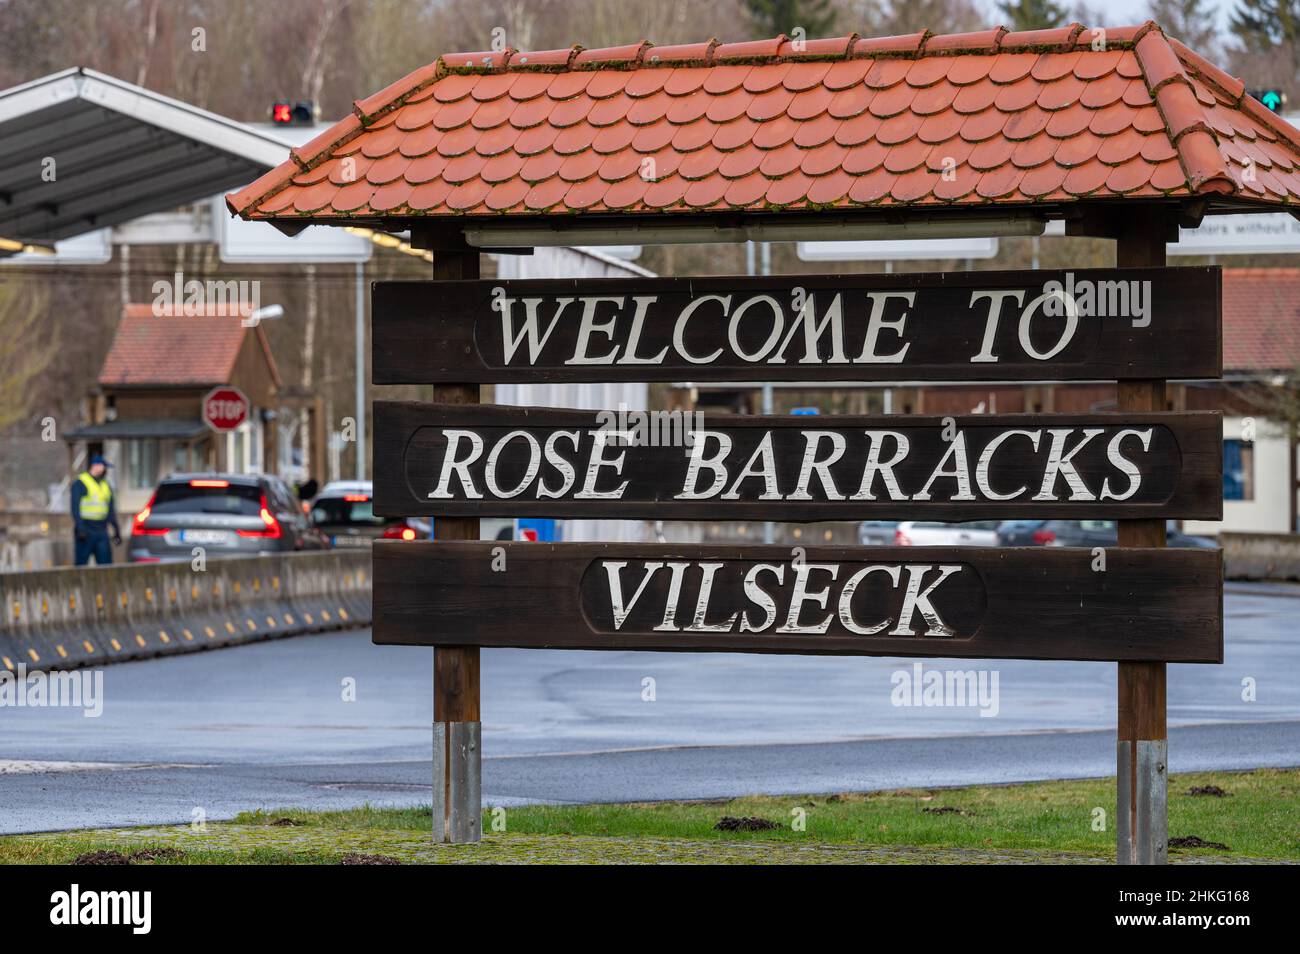 Page 2 - Vilseck High Resolution Stock Photography and Images - Alamy